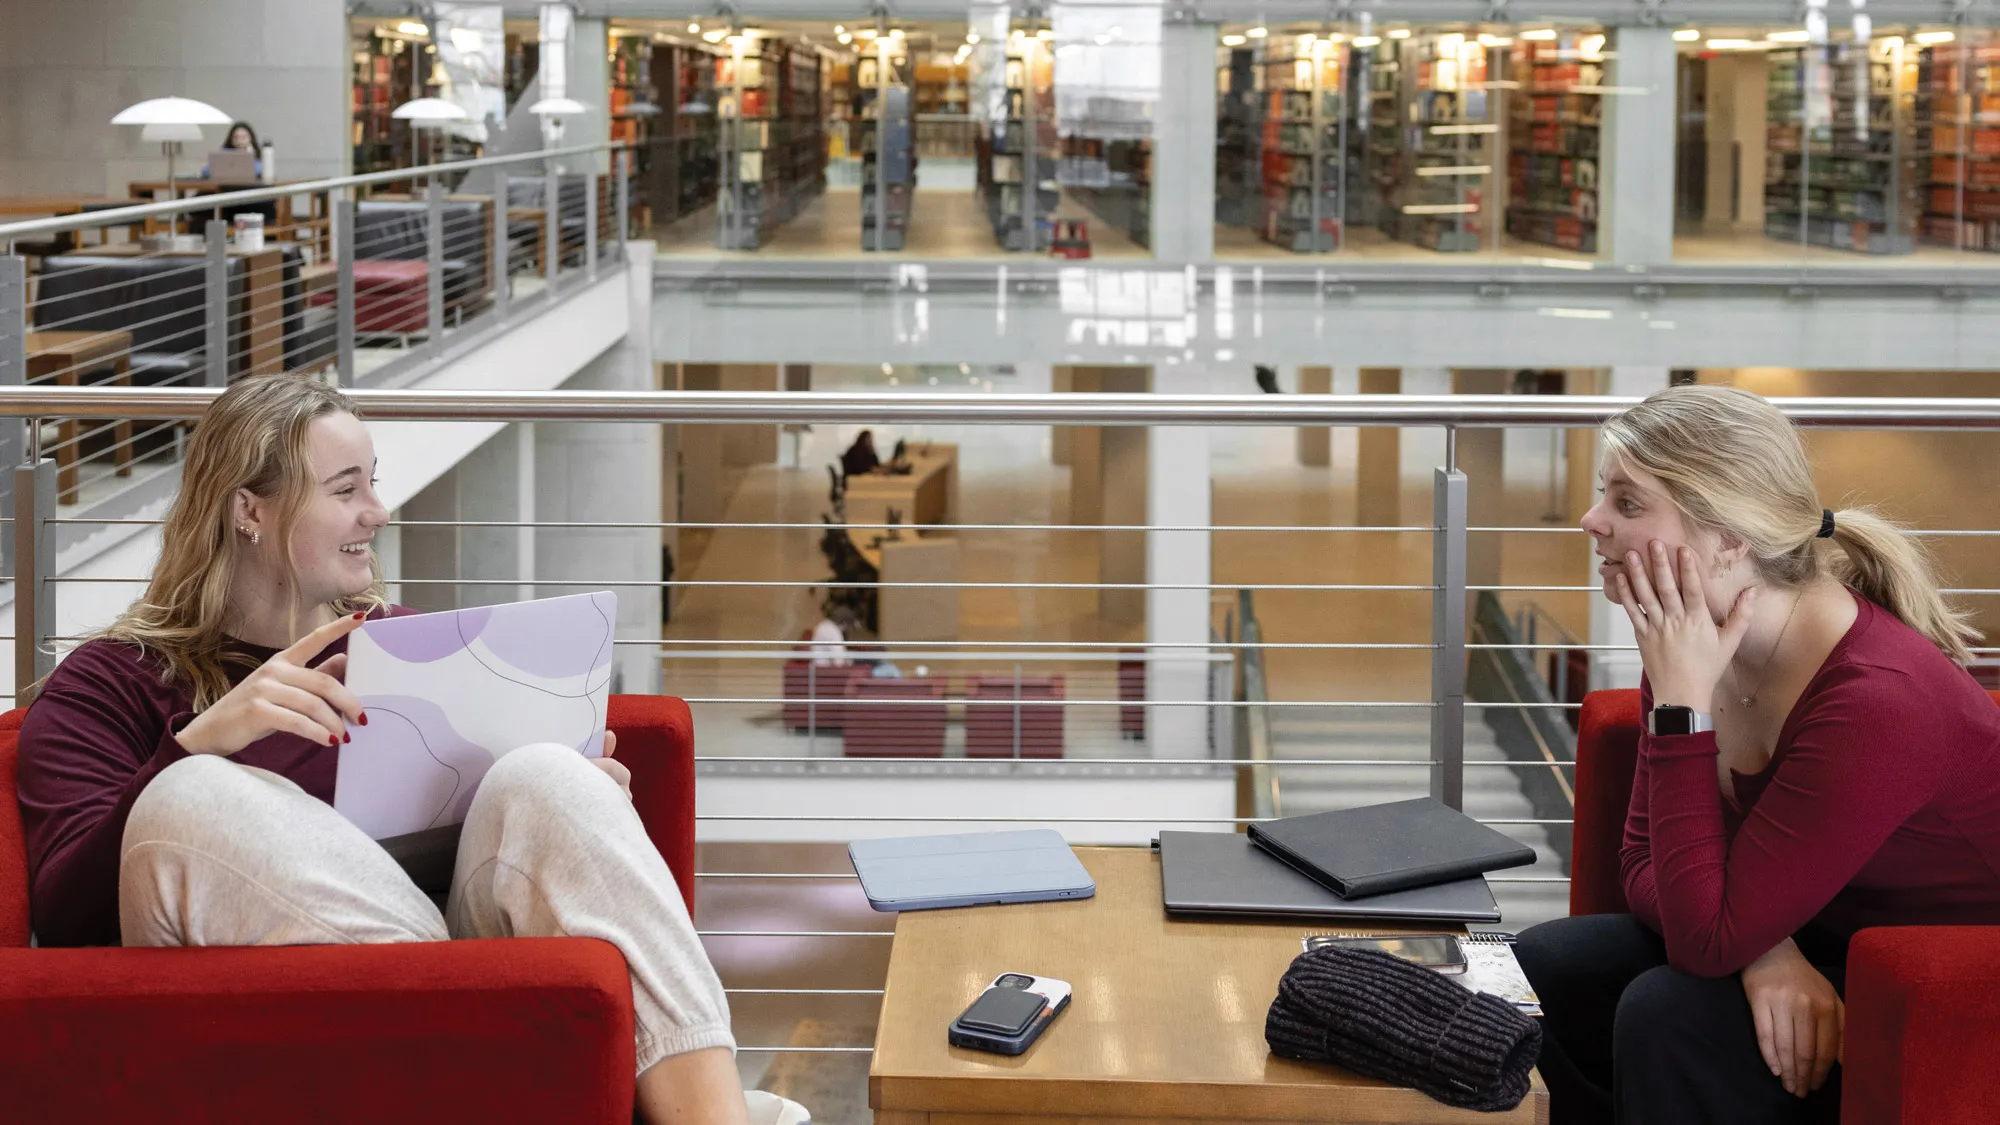 Sitting in armchairs in an atrium above the first floor facing each other, two young blond women smile and chat. Their body language says they’re good friends, and a closed laptop and face-down cellphone sit on a small knee-high table between them. Four floors of the glass-fronted stacks, revealing scores of book-filled shelves, make up the photo’s background. The scene is modern and brightly lit, showing the optimistic feeling of Thompson Library. 